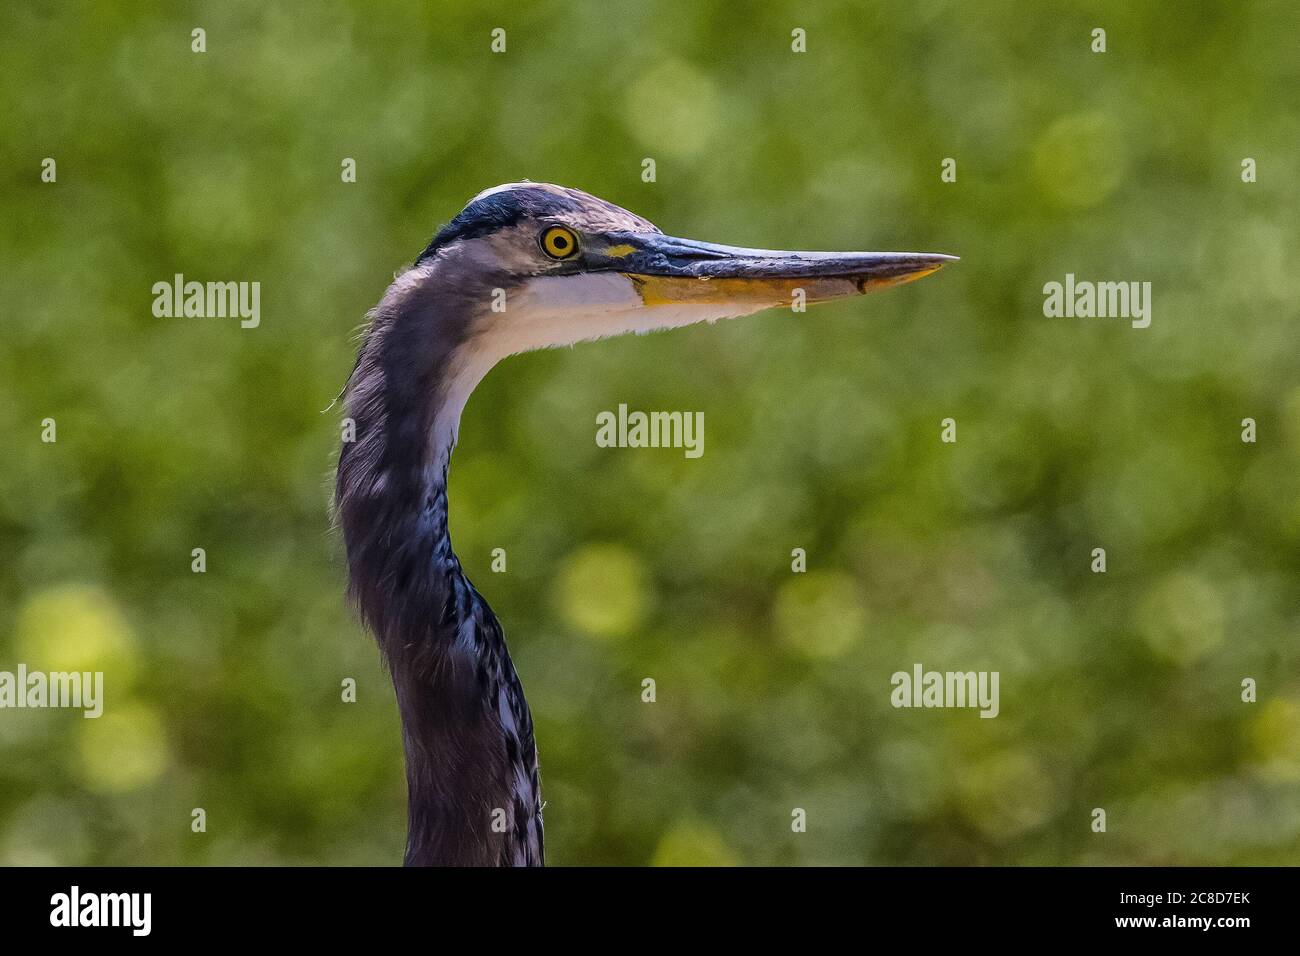 A ragged looking Great Blue Heron (Ardea herodias) at the San Luis National Wildlife Refuge in the Central Valley of California USA Stock Photo